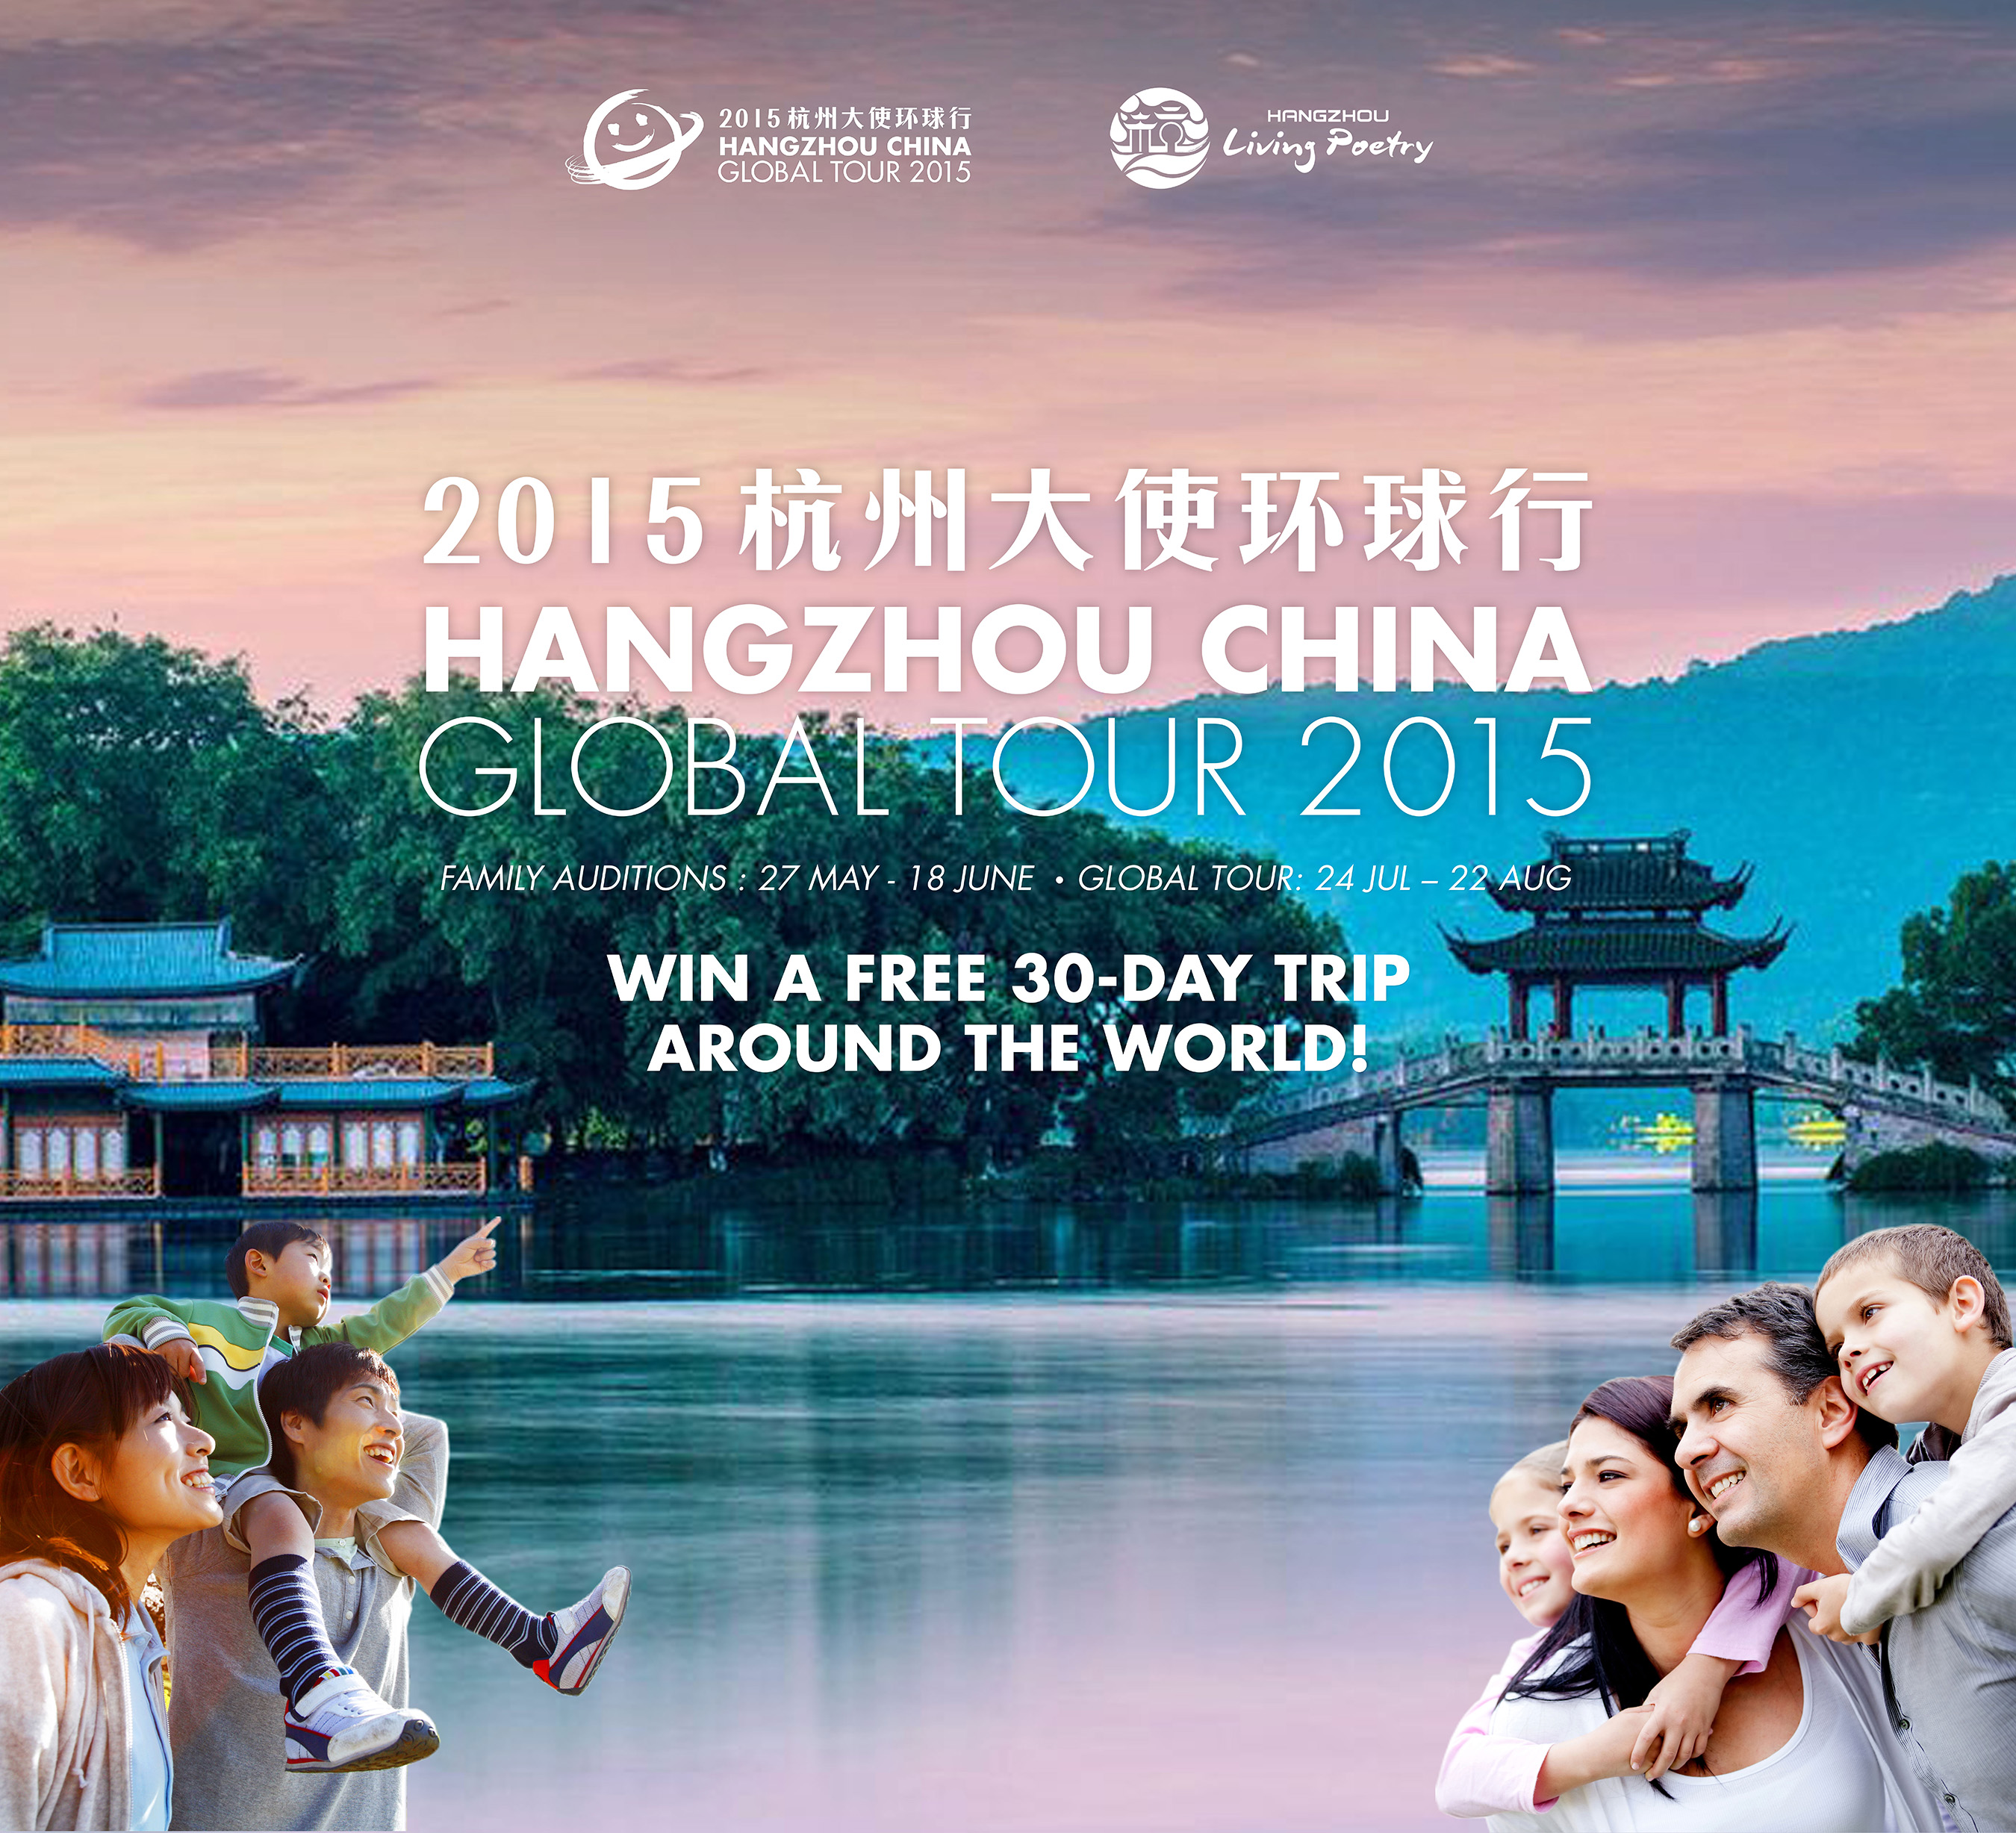 Two chosen families from different backgrounds are supported by Hangzhou Tourism Commission to be taken on a 30-day Global Tour from Hangzhou to following the Silk Road, building lasting friendships.